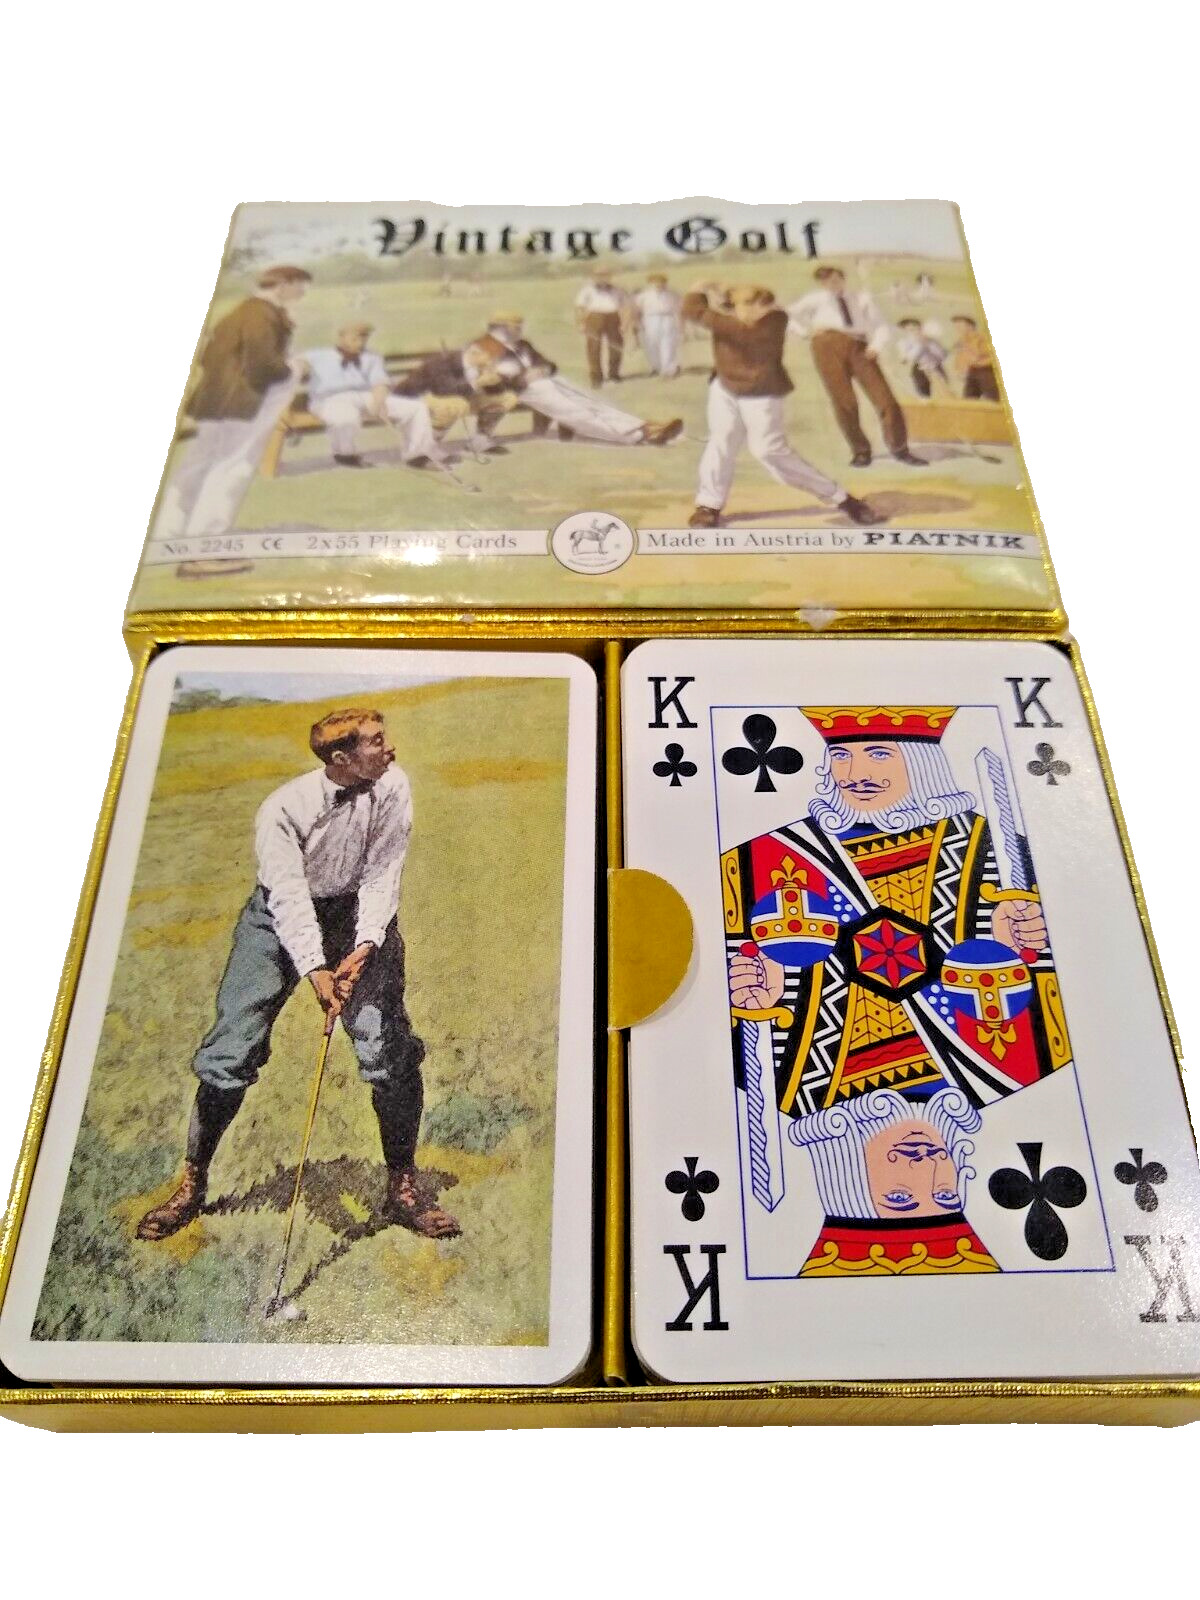 Vintage Golf Playing Cards 55ct double deck made in Austria / Piatnik gold box